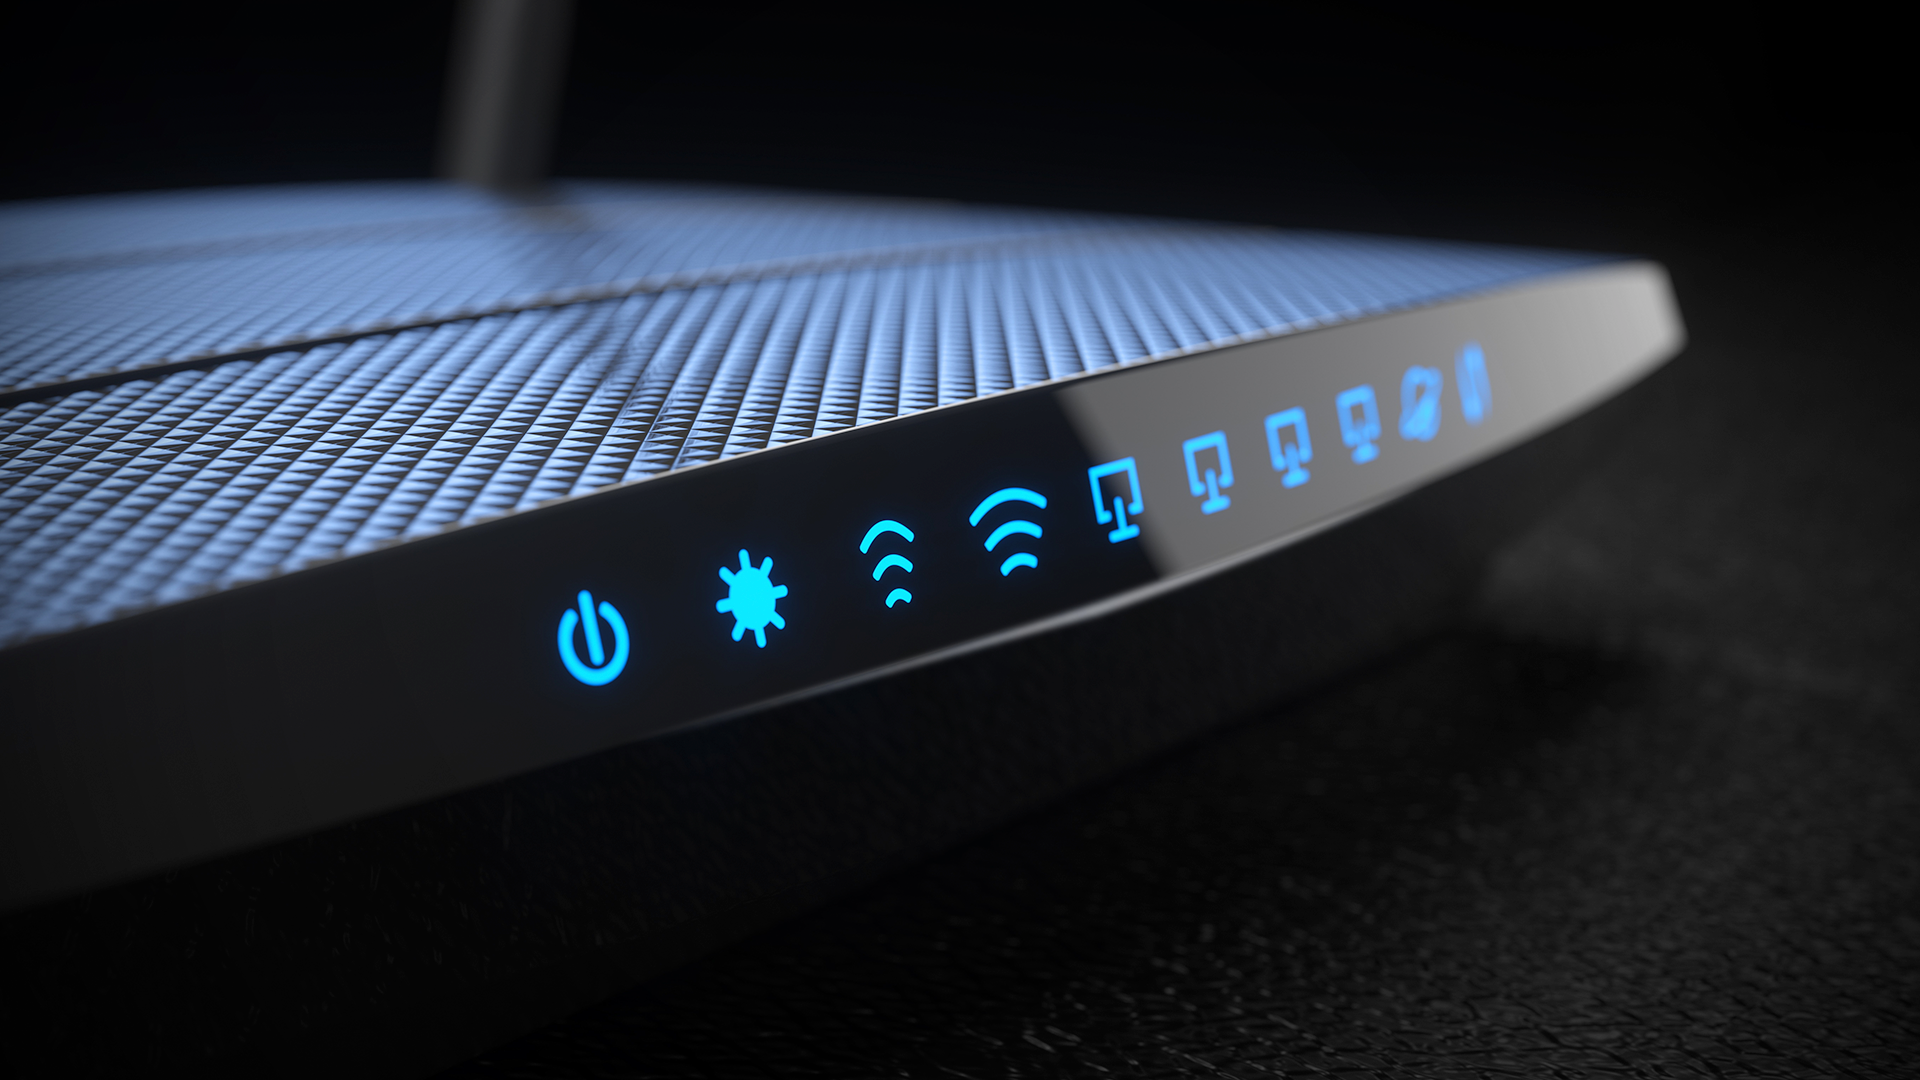 A Wi-Fi router in the dark.